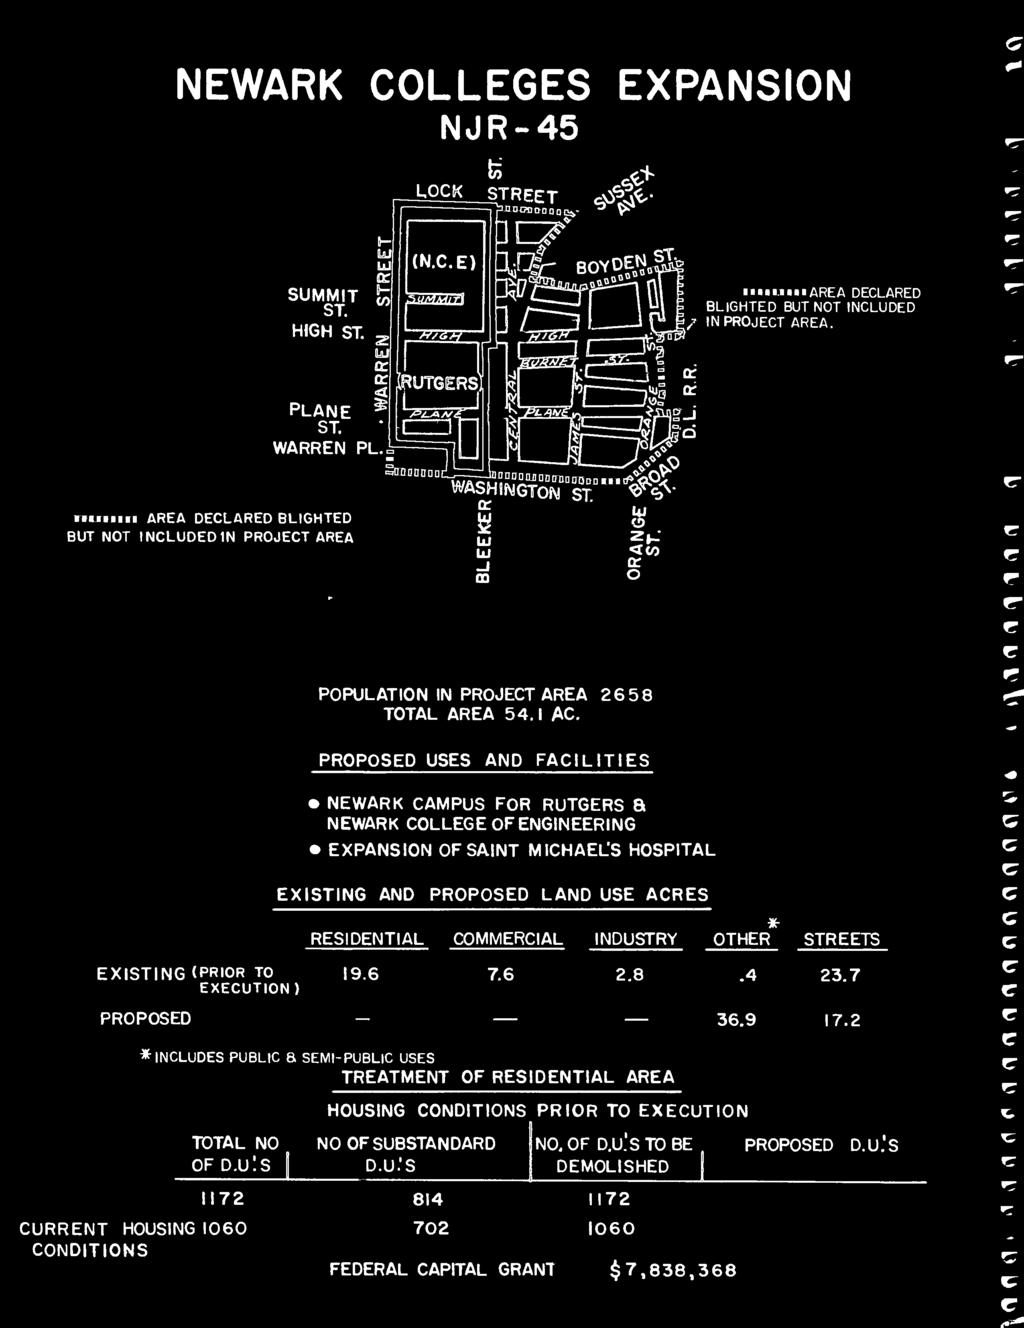 :S HOSPITAL AND LAND USE ACRES RESIDENTIAL COMMERCIAL INDUSTRY OTHER * STREETS (PRIOR TO EXECUTION) 19.6 7.6 2.8.